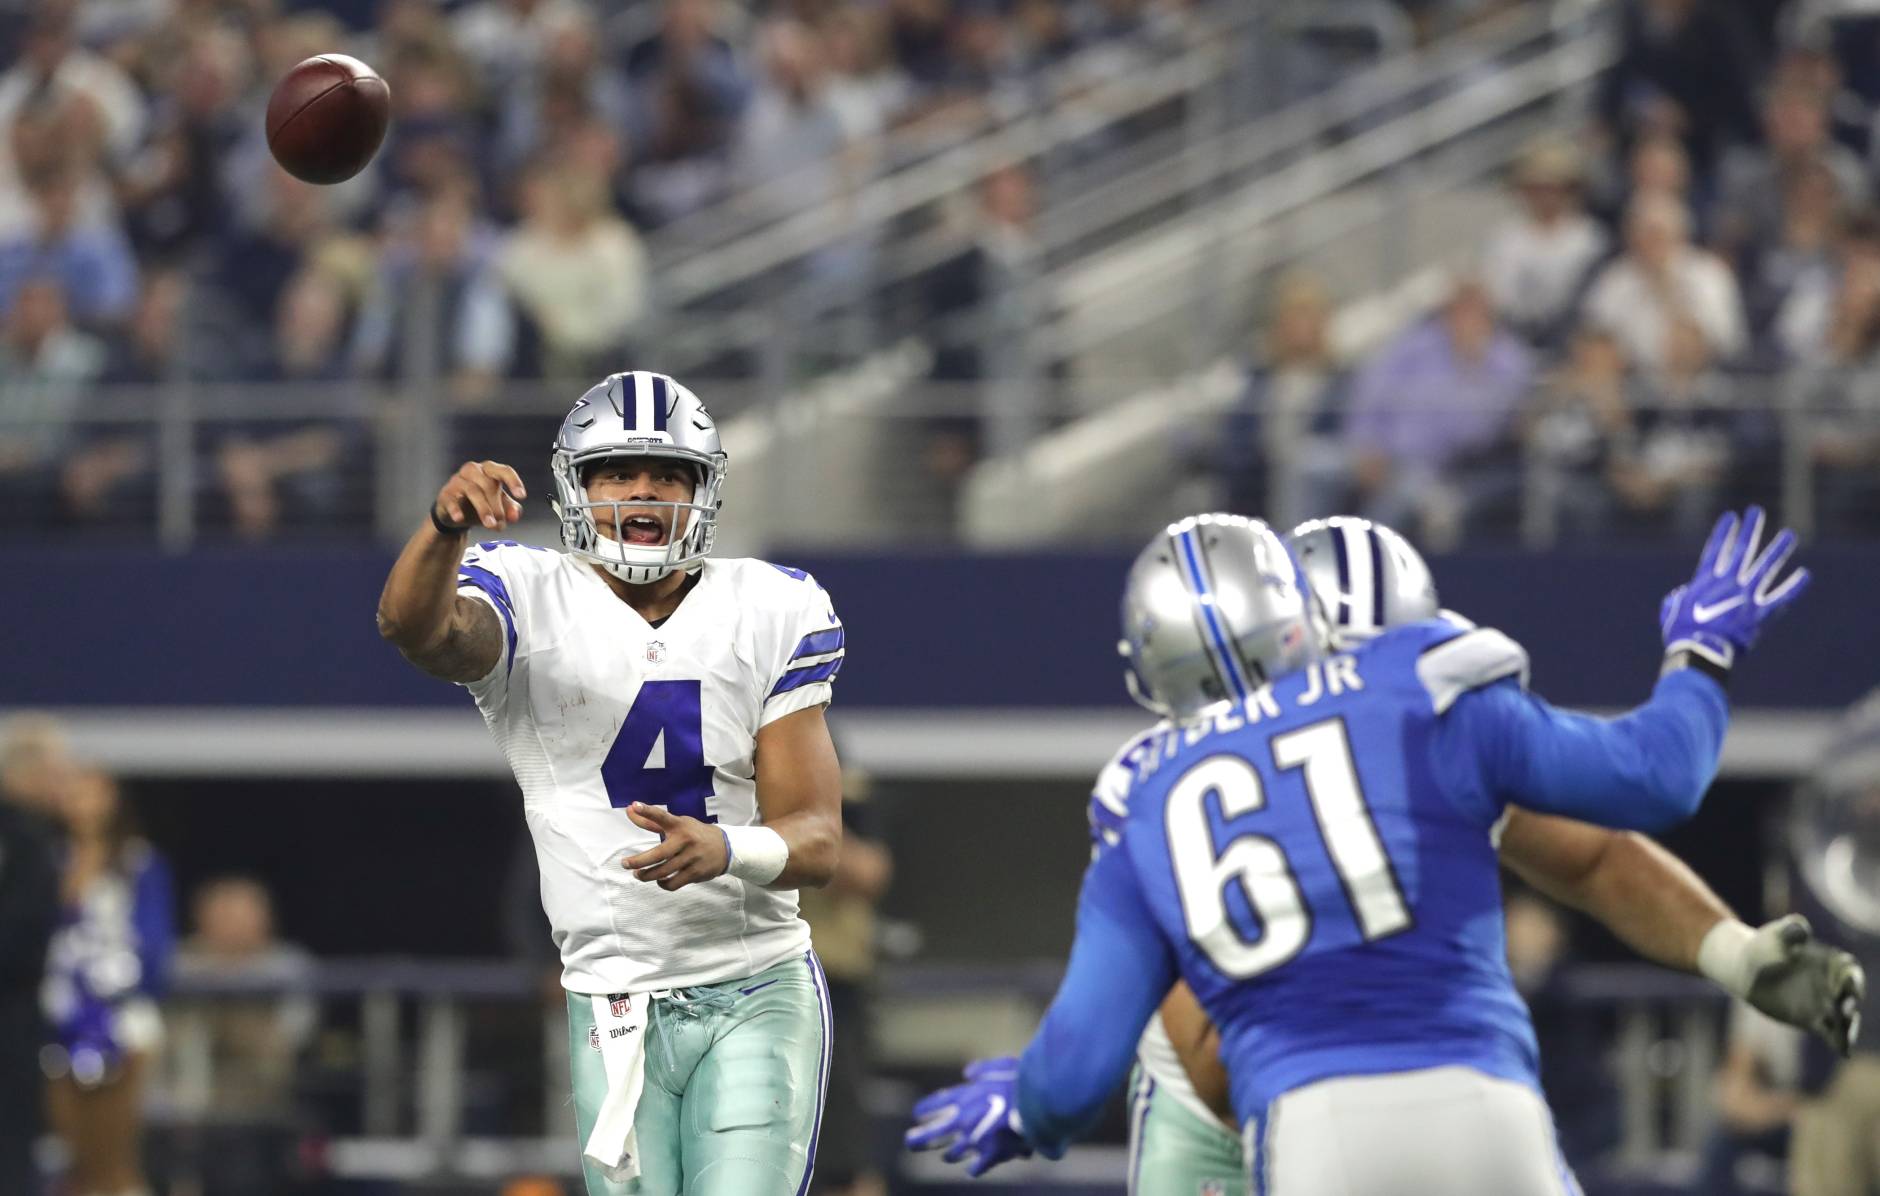 ARLINGTON, TX - DECEMBER 26: Dak Prescott #4 of the Dallas Cowboys throws as Kerry Hyder #61 of the Detroit Lions defends during the first half at AT&amp;T Stadium on December 26, 2016 in Arlington, Texas. (Photo by Ronald Martinez/Getty Images)